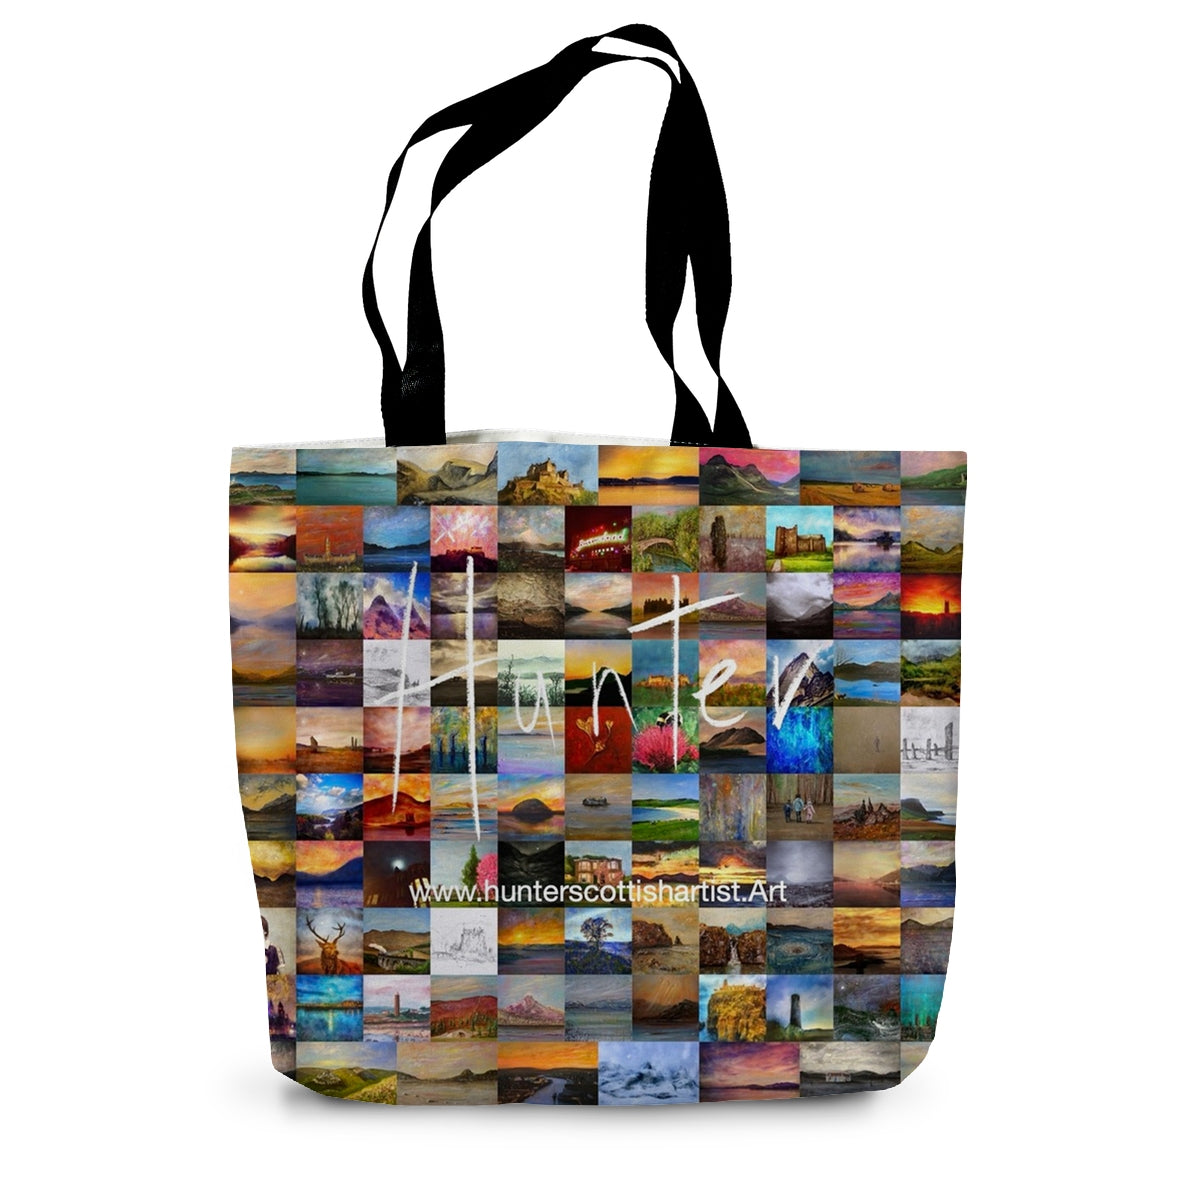 From Lyle Hill Art Gifts Canvas Tote Bag-Bags-River Clyde Art Gallery-14"x18.5"-Paintings, Prints, Homeware, Art Gifts From Scotland By Scottish Artist Kevin Hunter